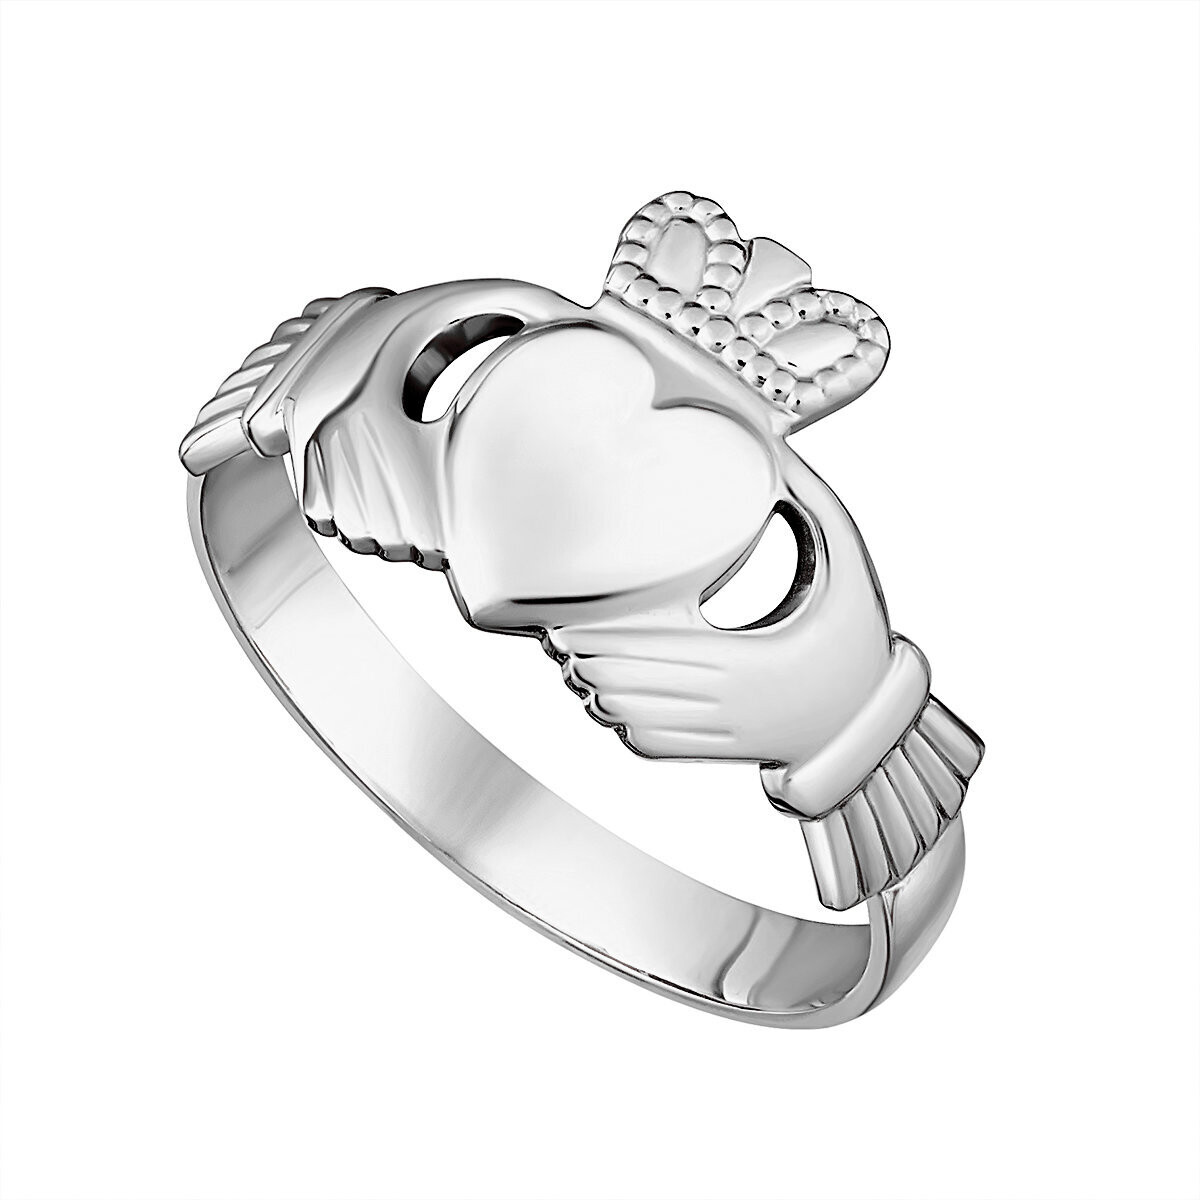 Mens Claddagh Ring- Sterling Silver- Our Standard Silver Mens Claddagh Ring